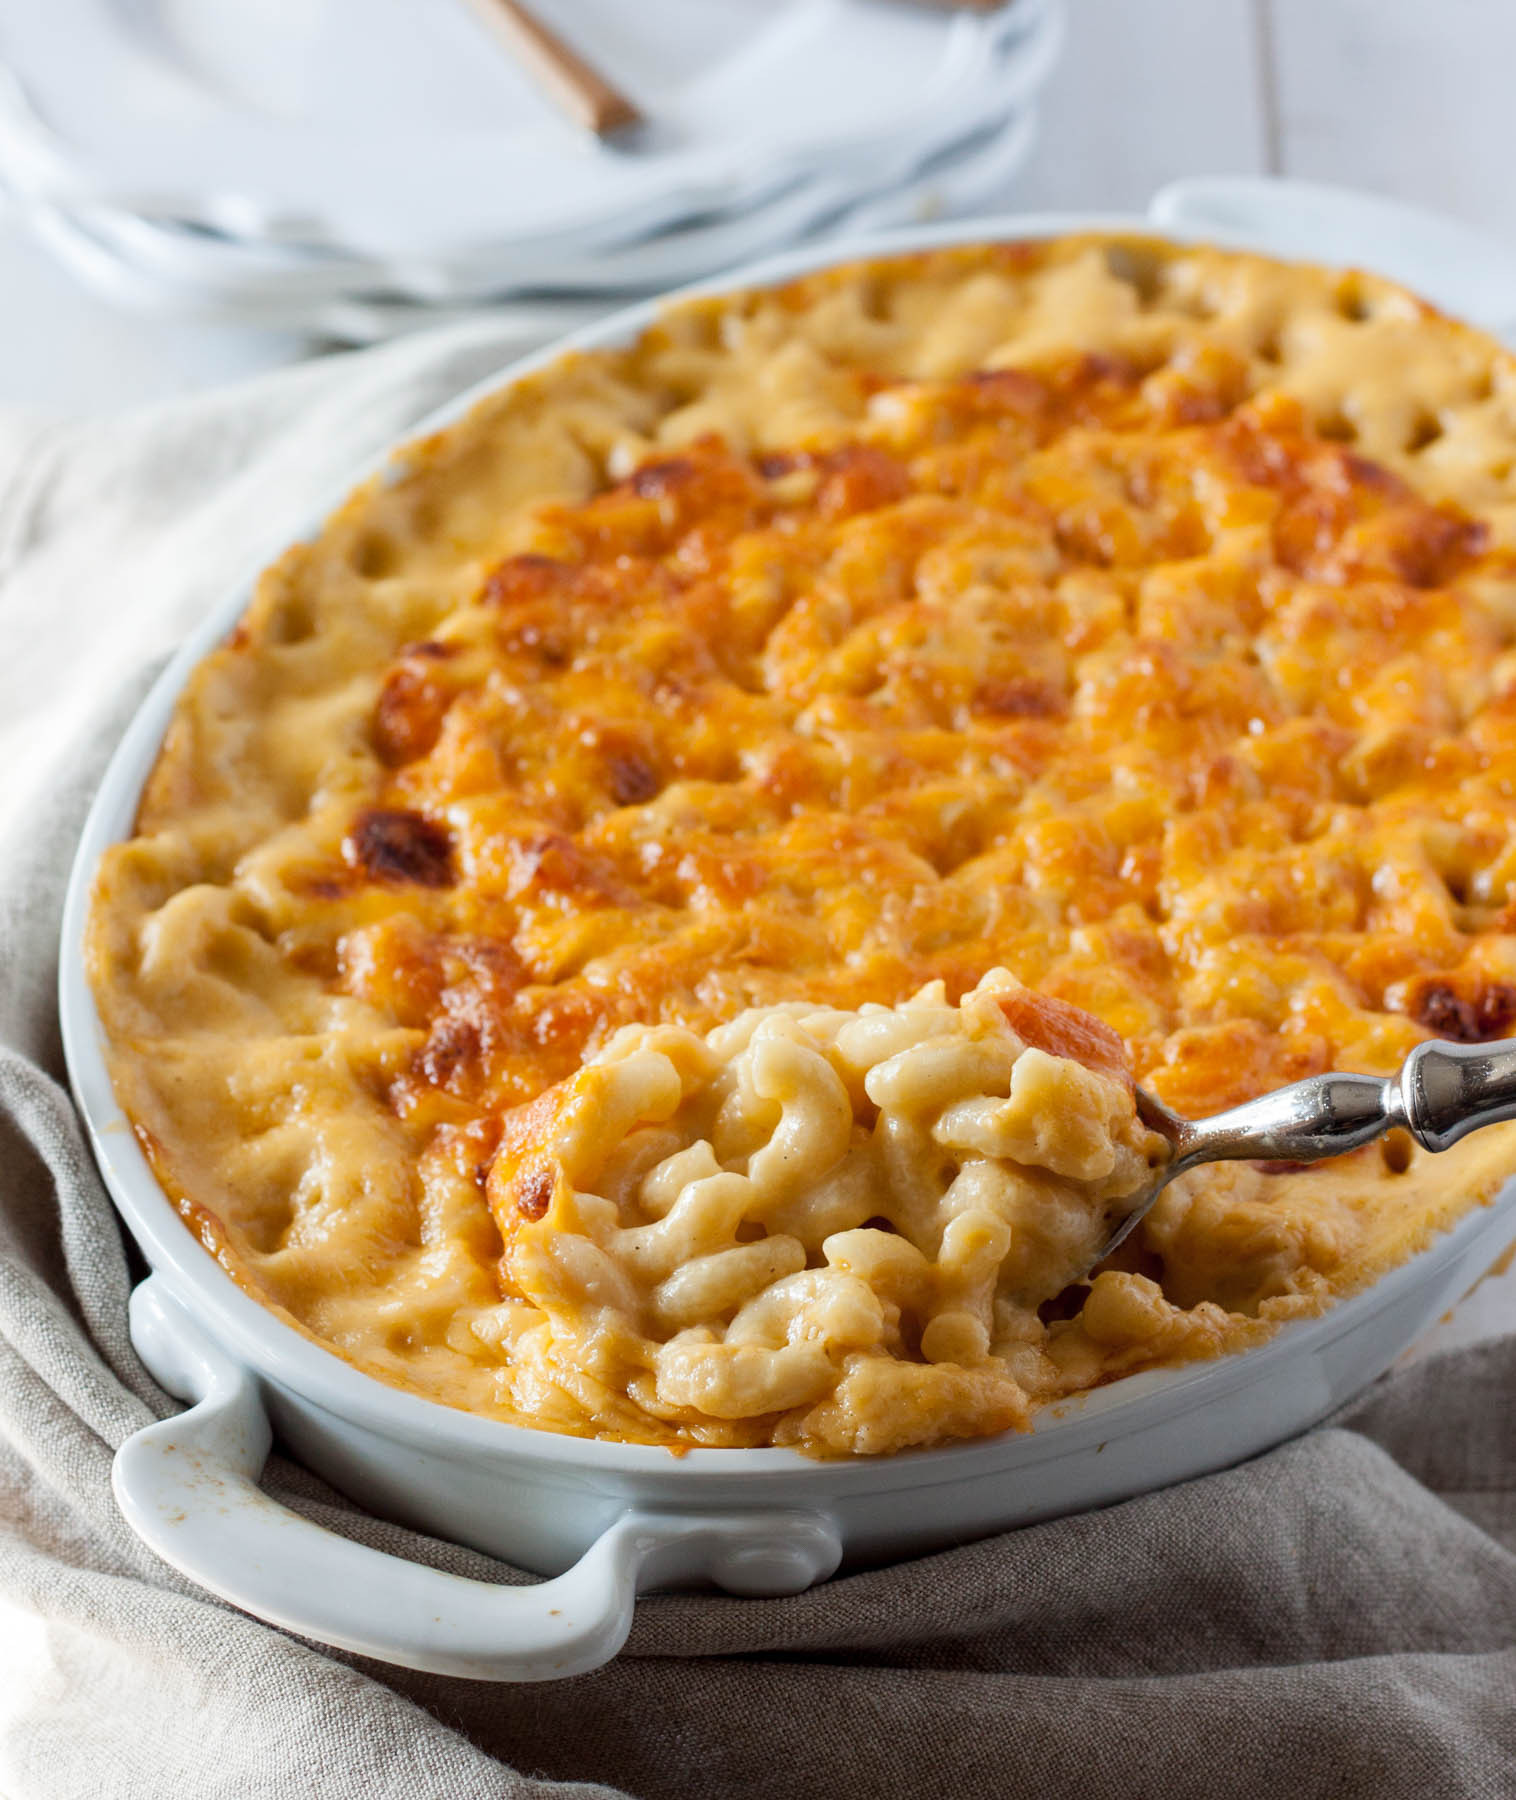 Recipe For Homemade Baked Macaroni And Cheese
 15 Mac and Cheese Recipes That Will Make Your Mouth Water